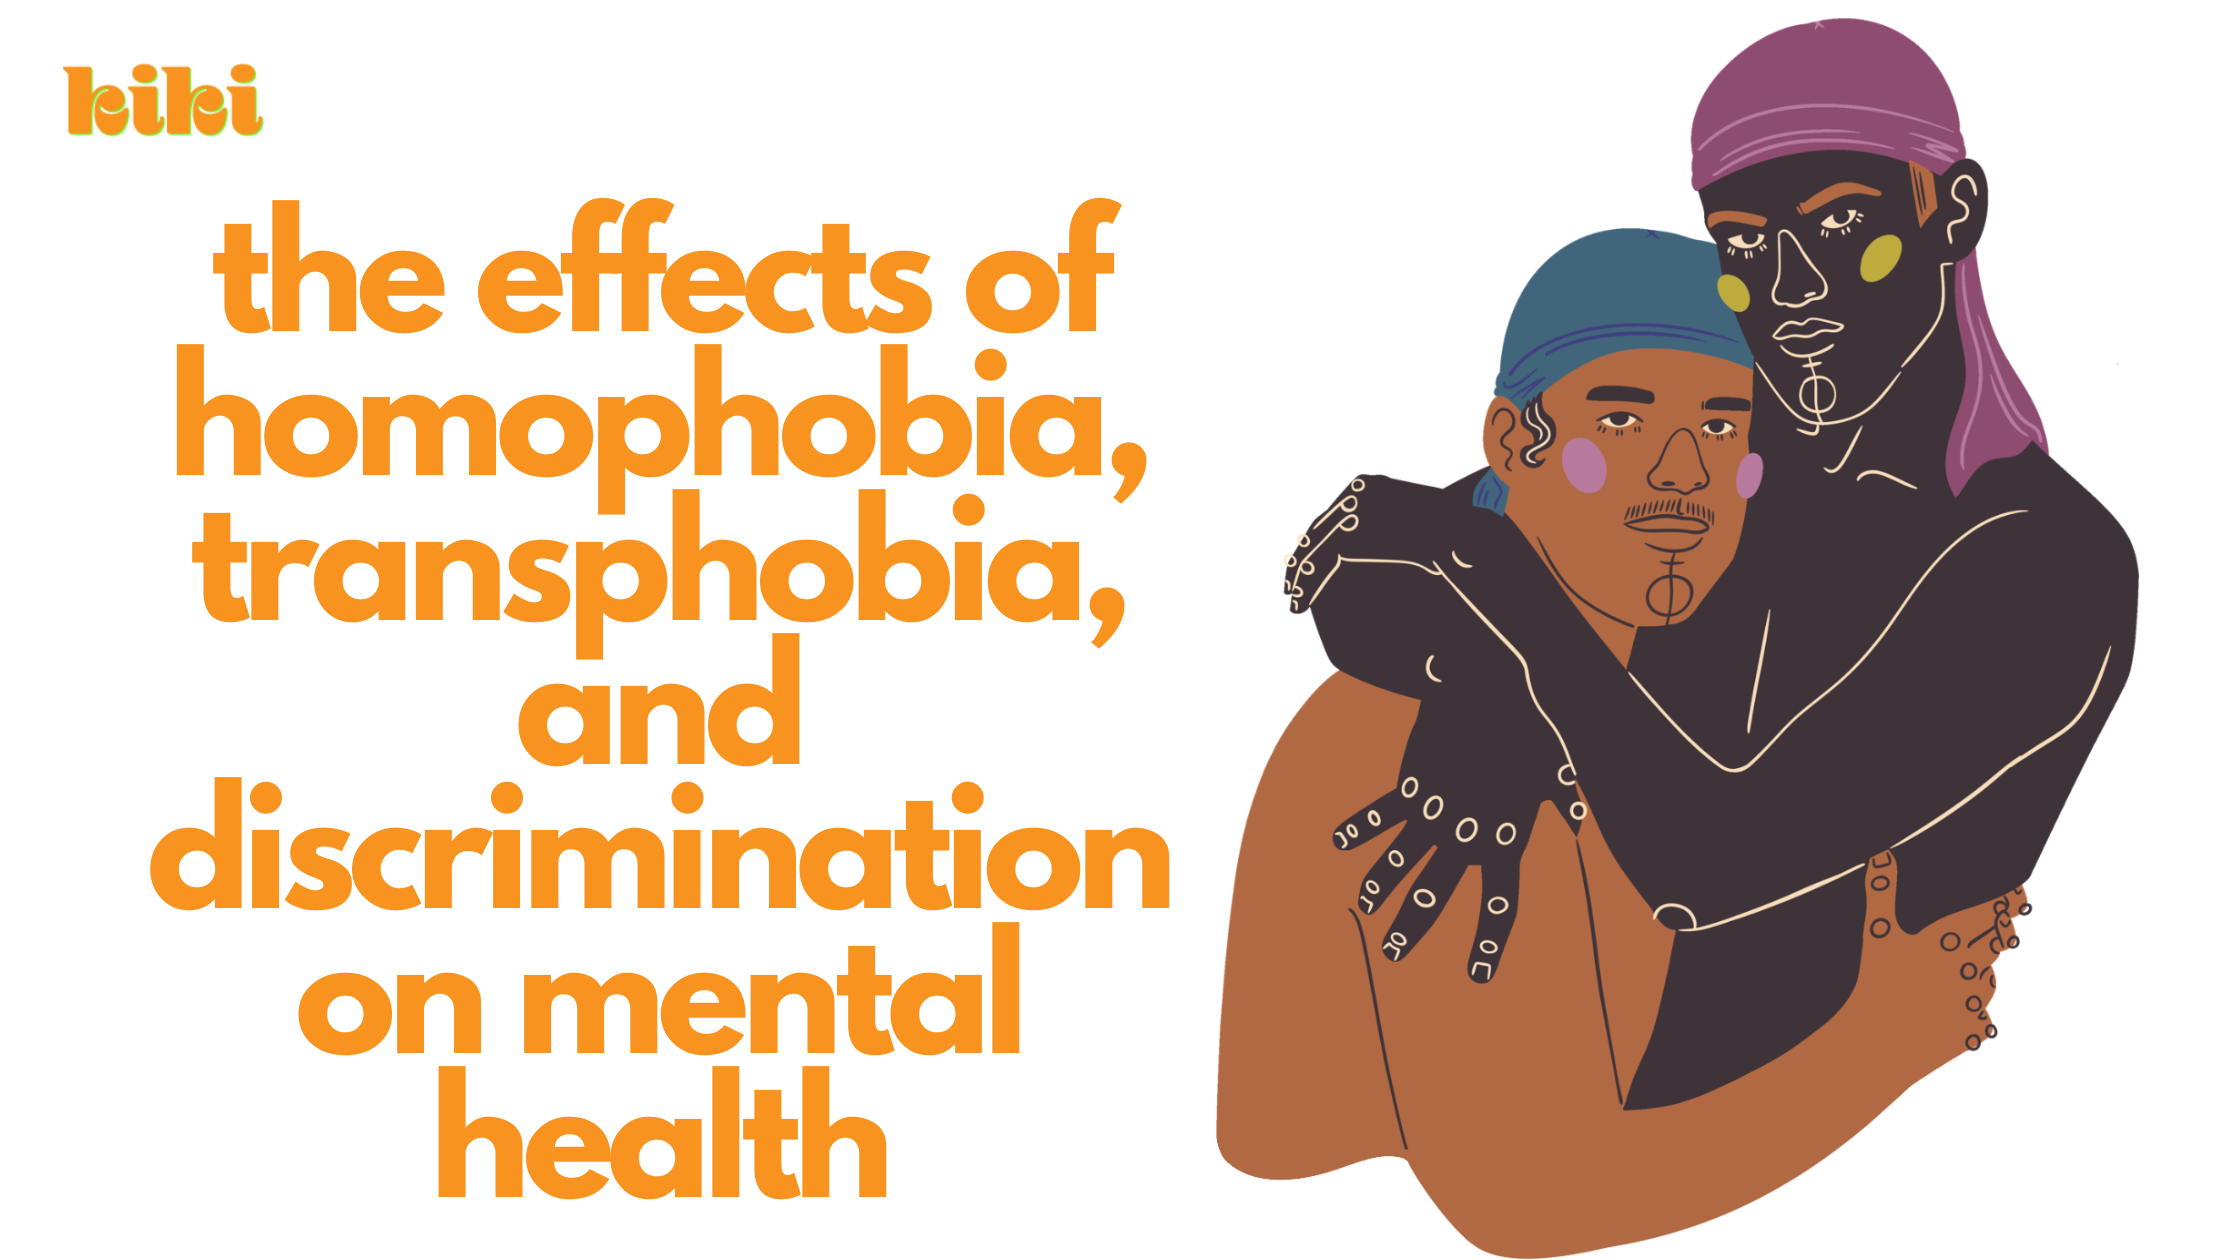 The effects of homophobia, transphobia, and discrimination on mental health. Illustration of two Black men wearing durags embracing.